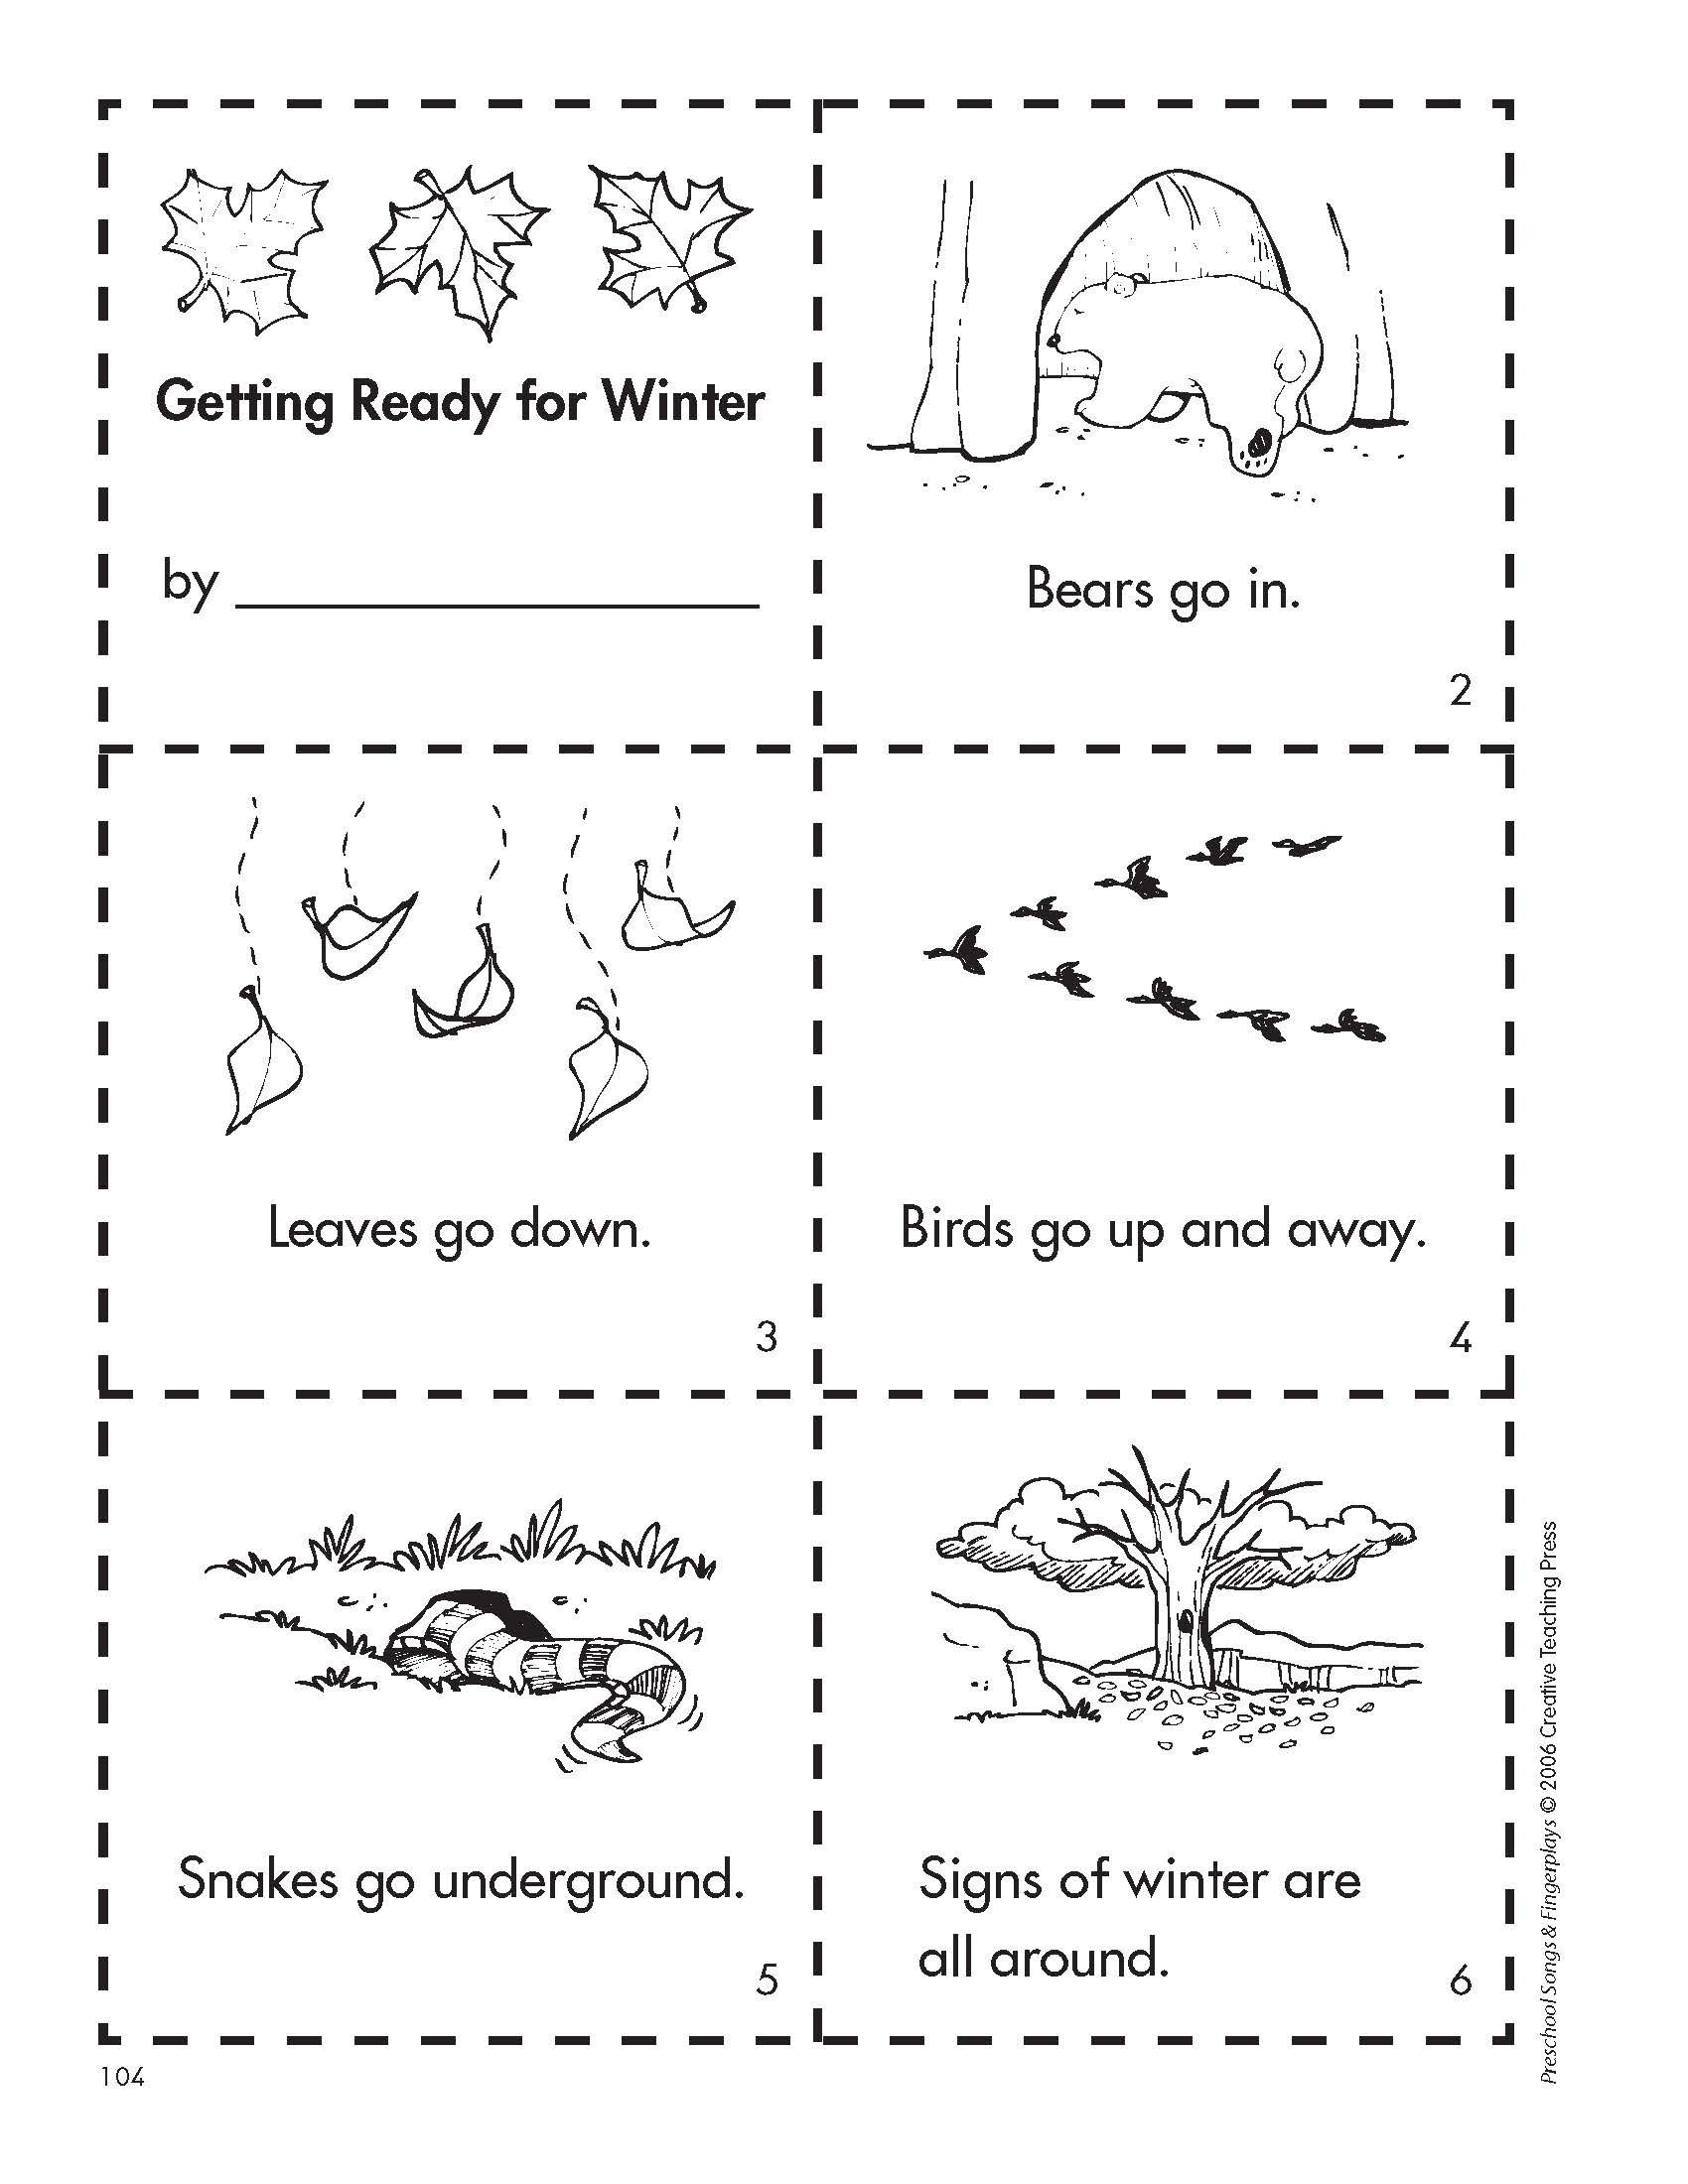 Get Ready For Winter With This Free Minibook Reproducible. | Fall | Free Printable Hibernation Worksheets